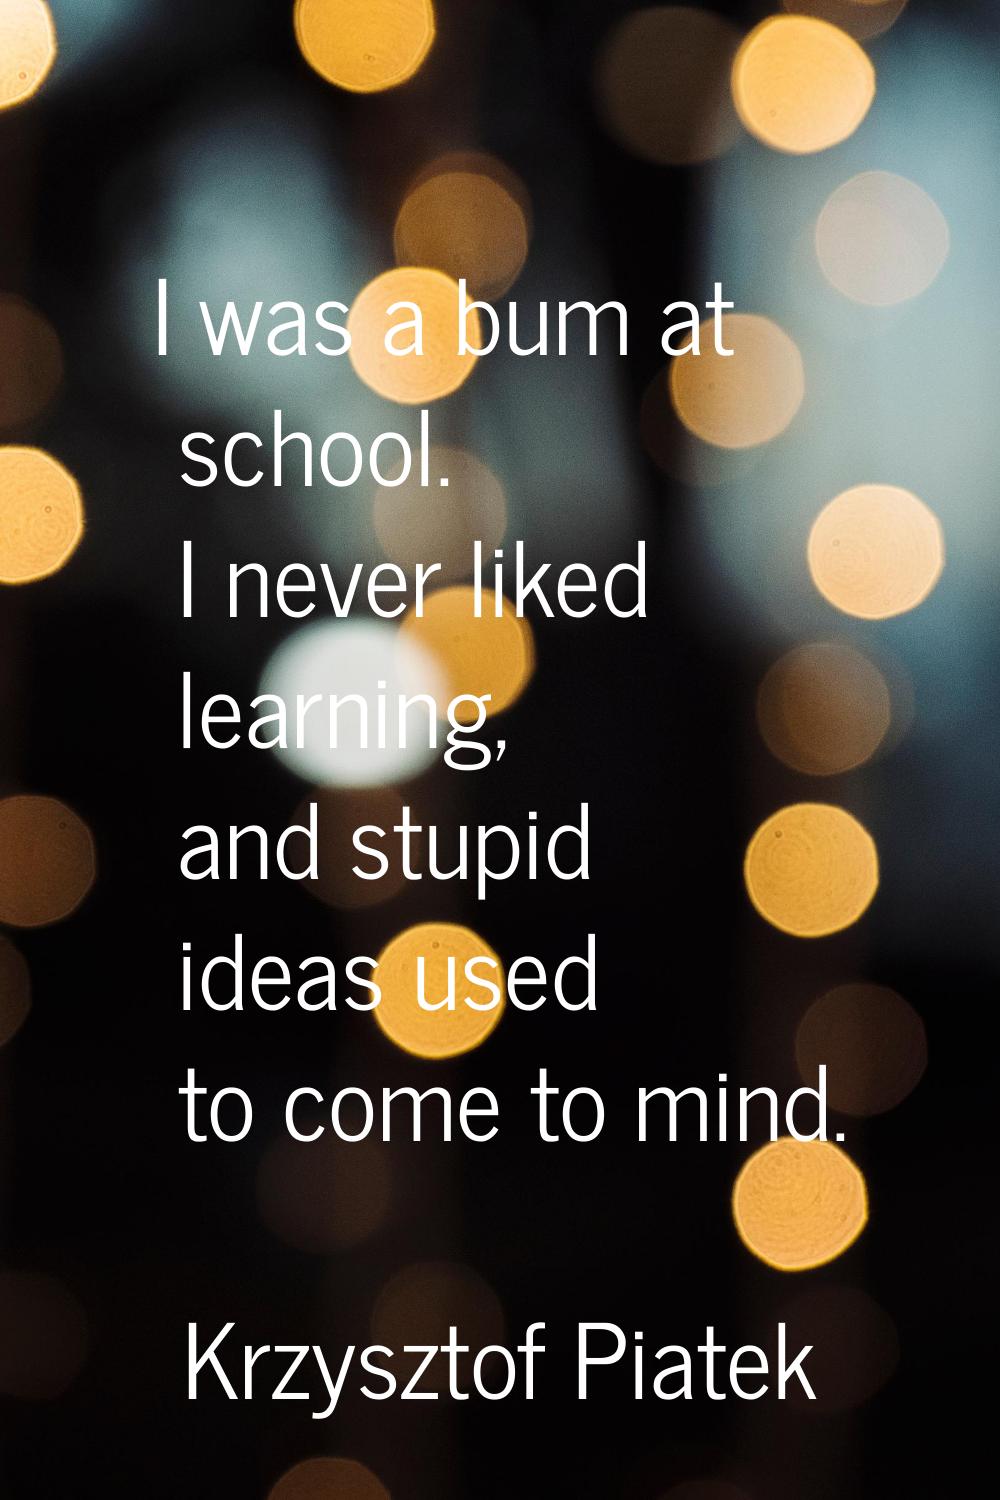 I was a bum at school. I never liked learning, and stupid ideas used to come to mind.